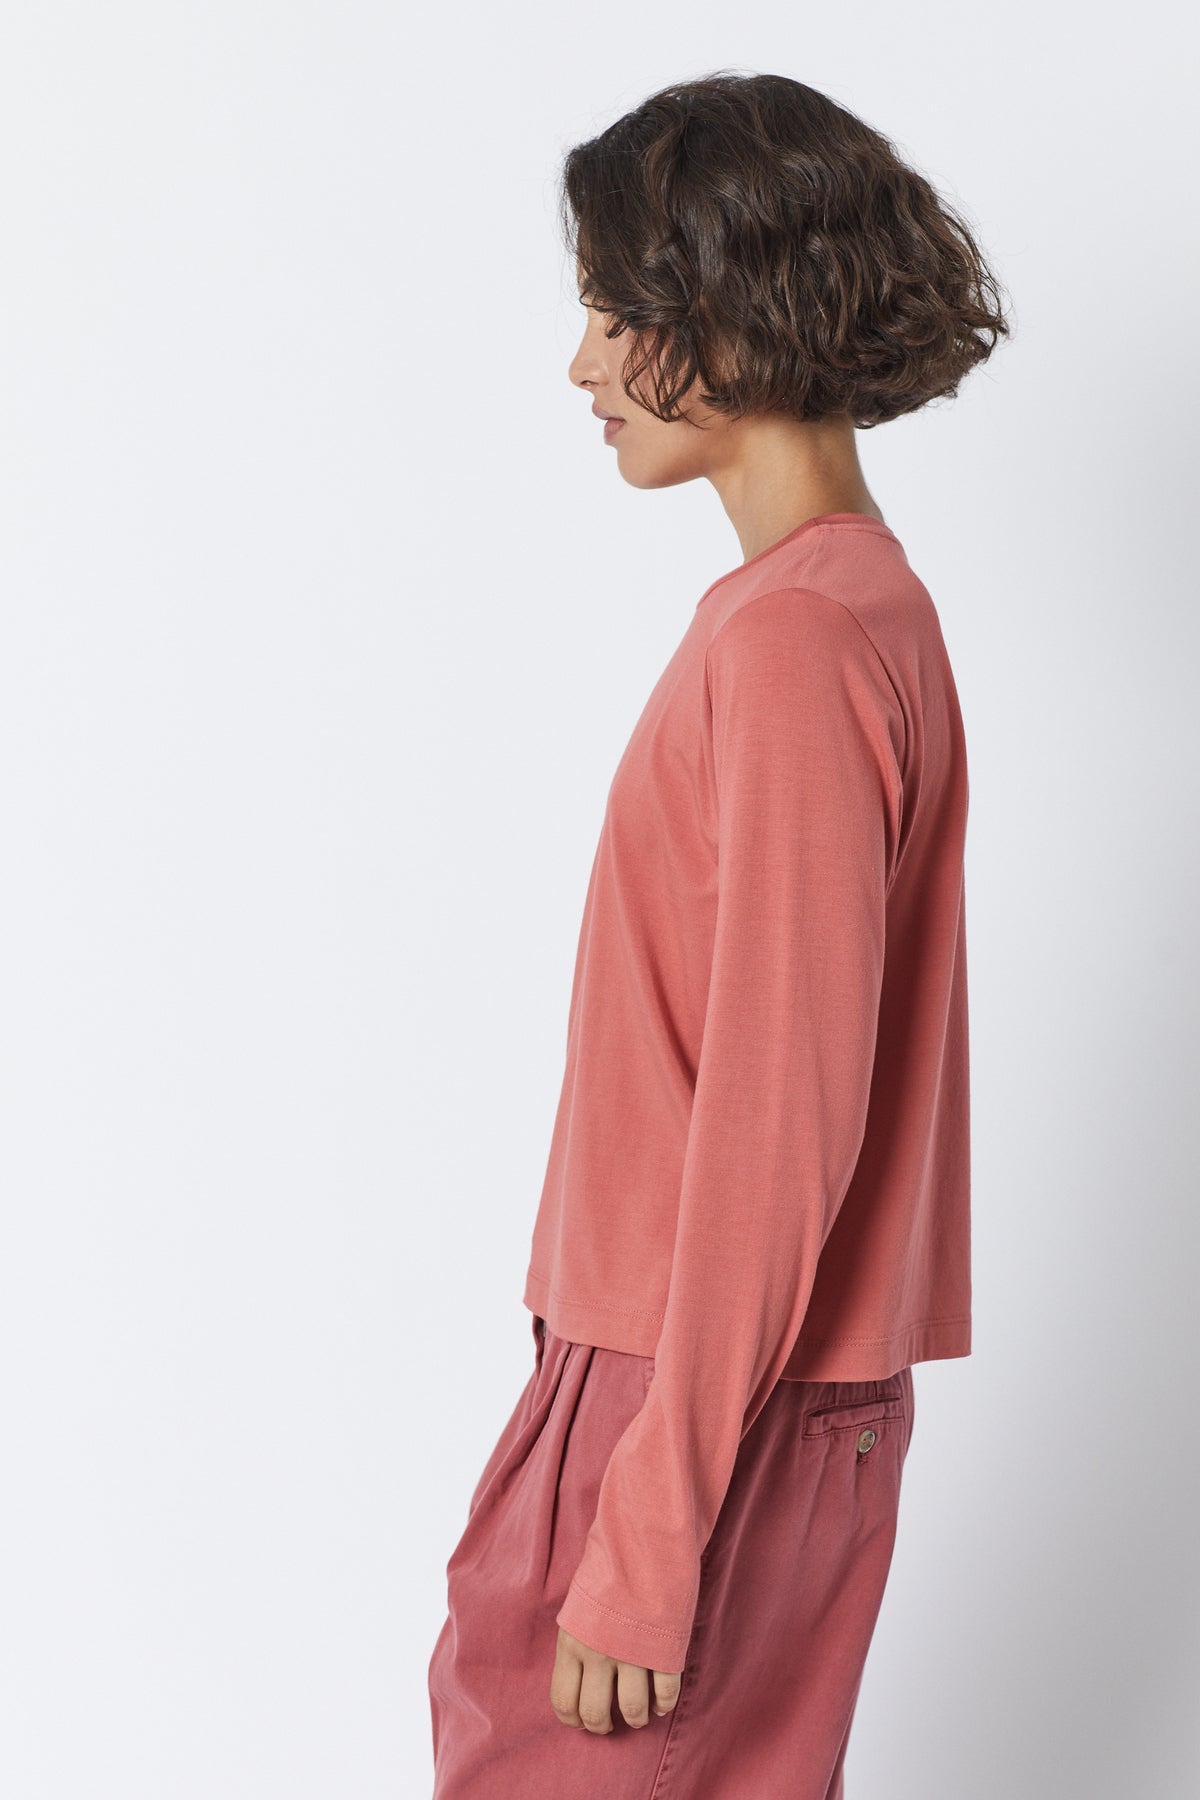 The model is wearing a Velvet by Jenny Graham soft rib knit, pink long-sleeved PACIFICA TEE top and pants.-35495909589185